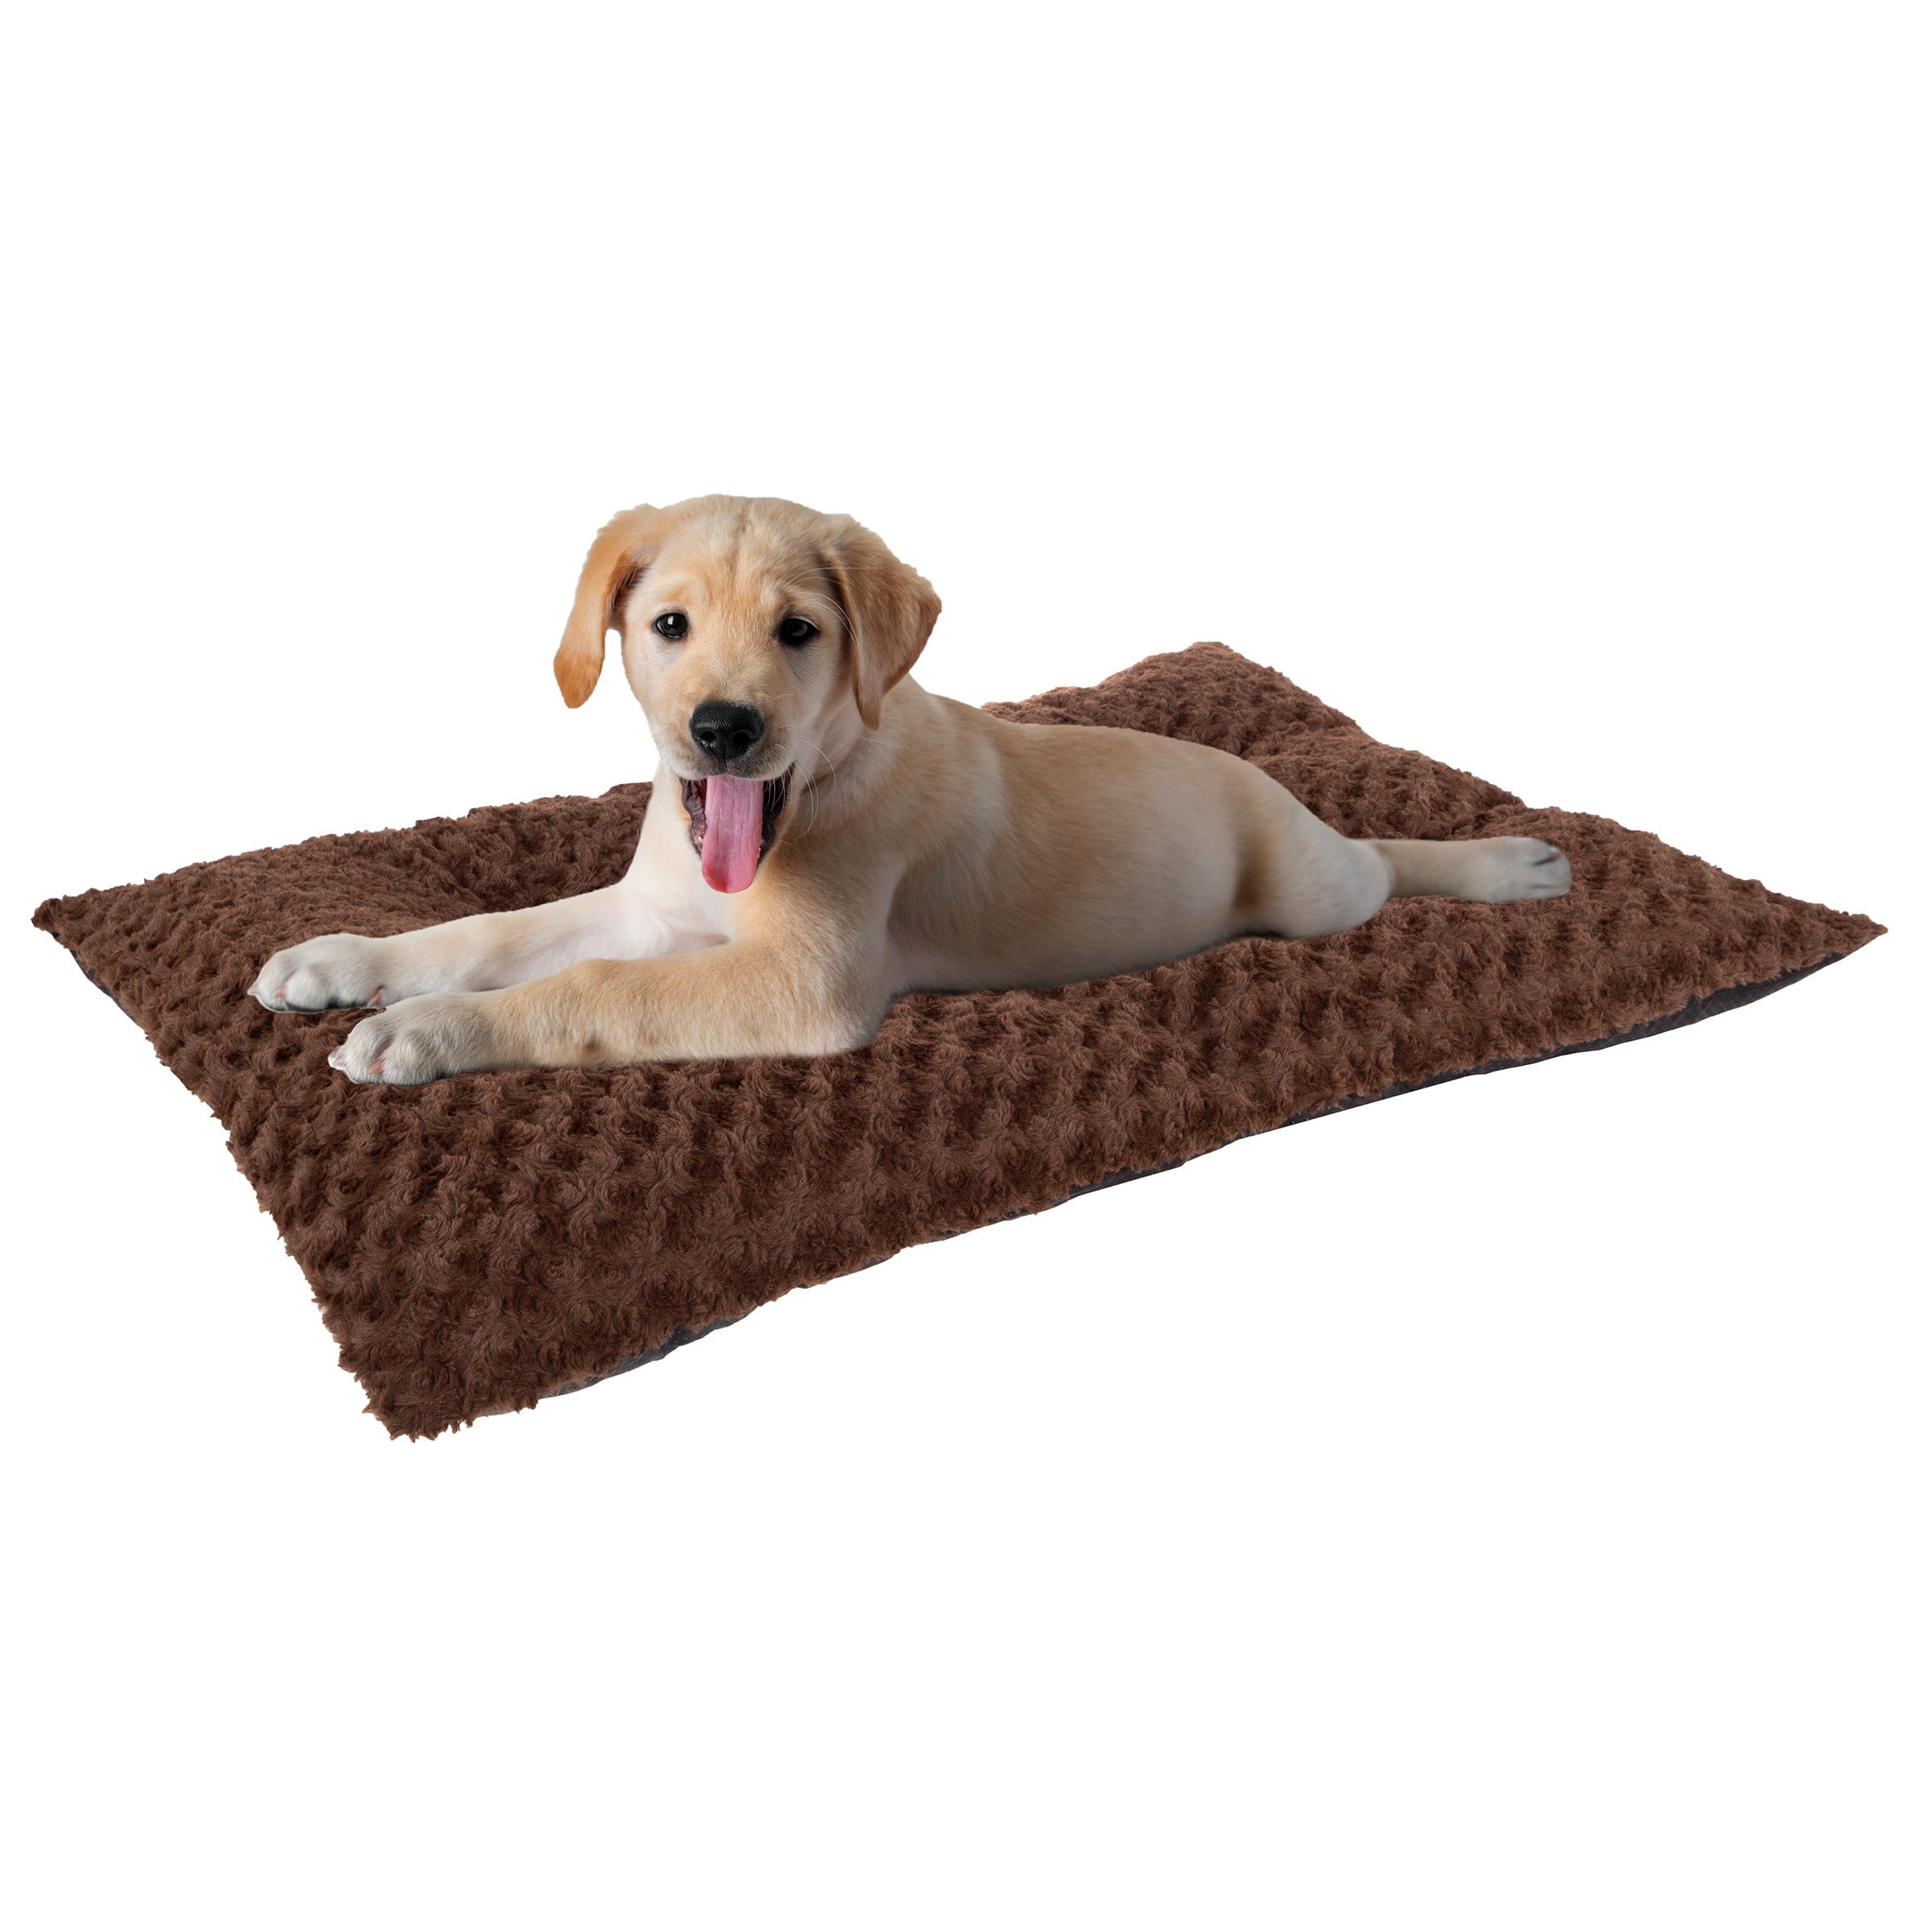 Pet Bed – 32x19 Dog Pillow and Crate Pad with Faux Fur Sleep Surface and Non-Slip Bottom – Machine Washable Dog Bed by PETMAKER (Brown)